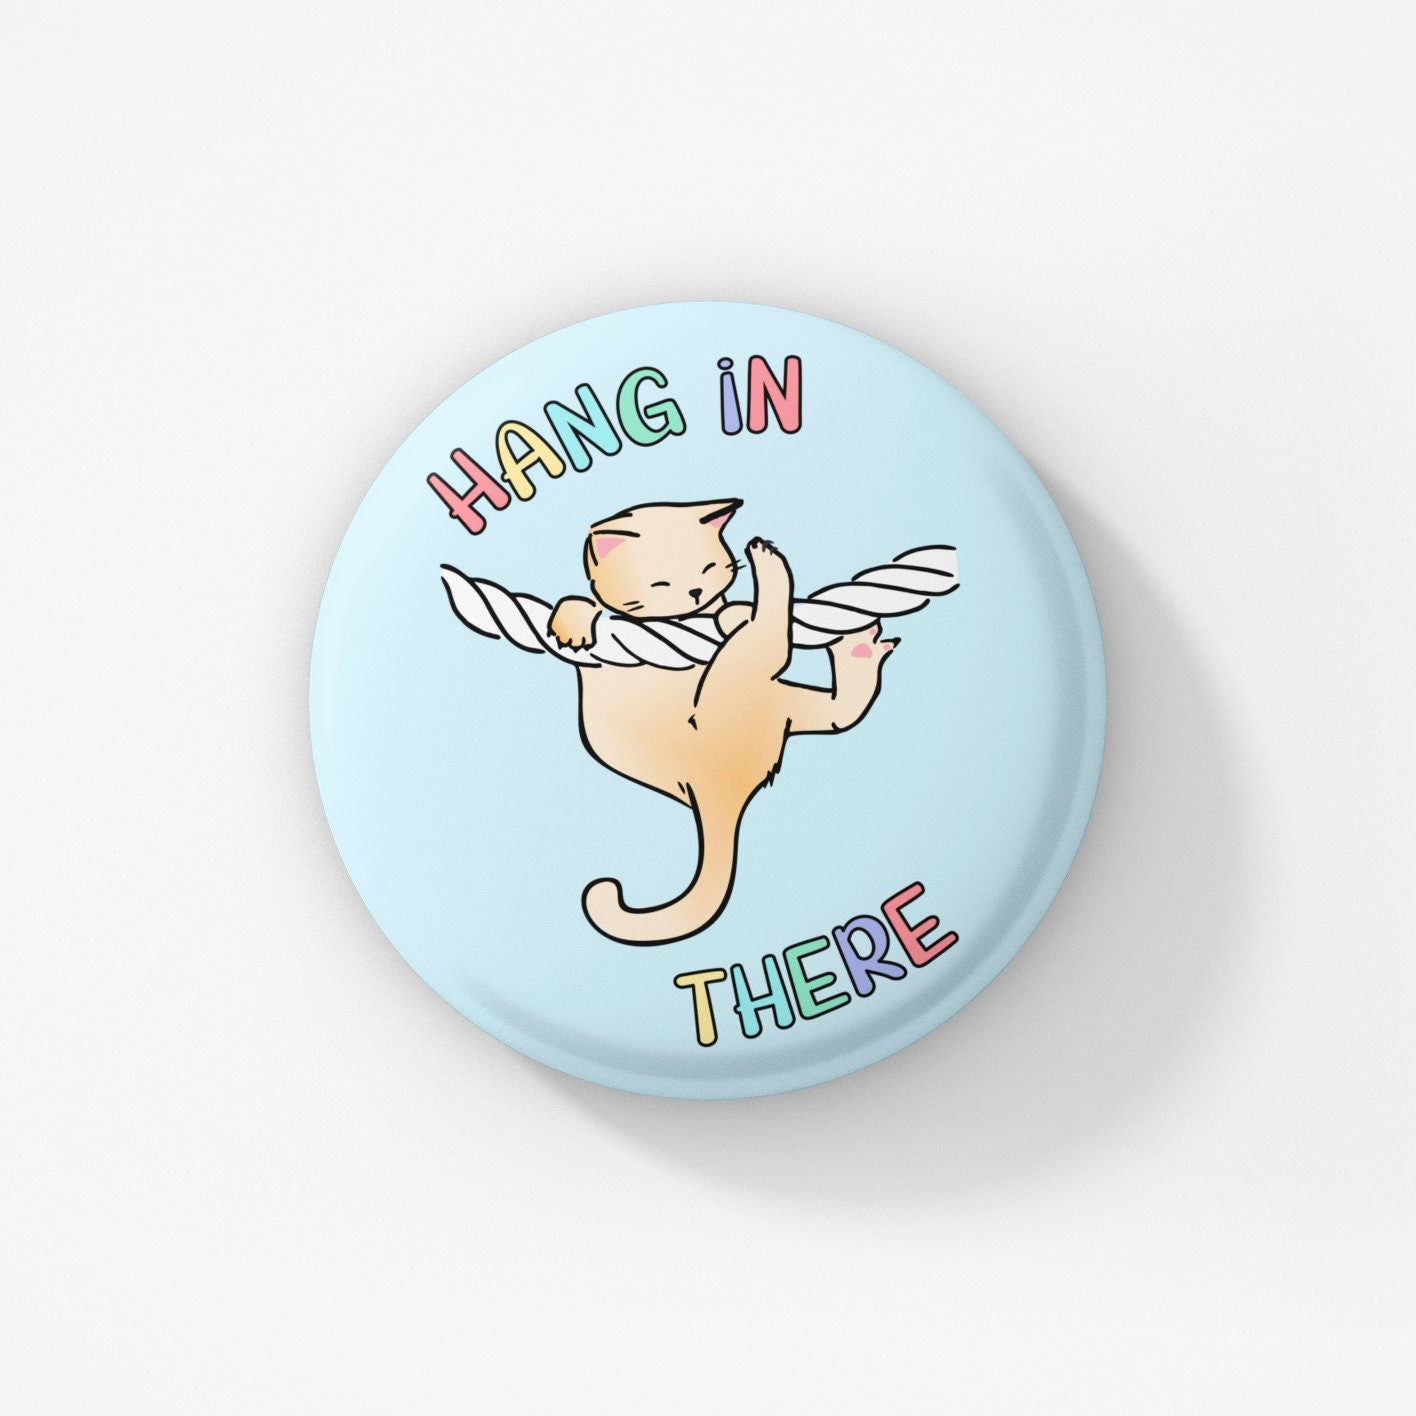 Hang In There Cat Pin Badge | Positive Pin - Cat Pin - Positive Badges - Motivational Gift